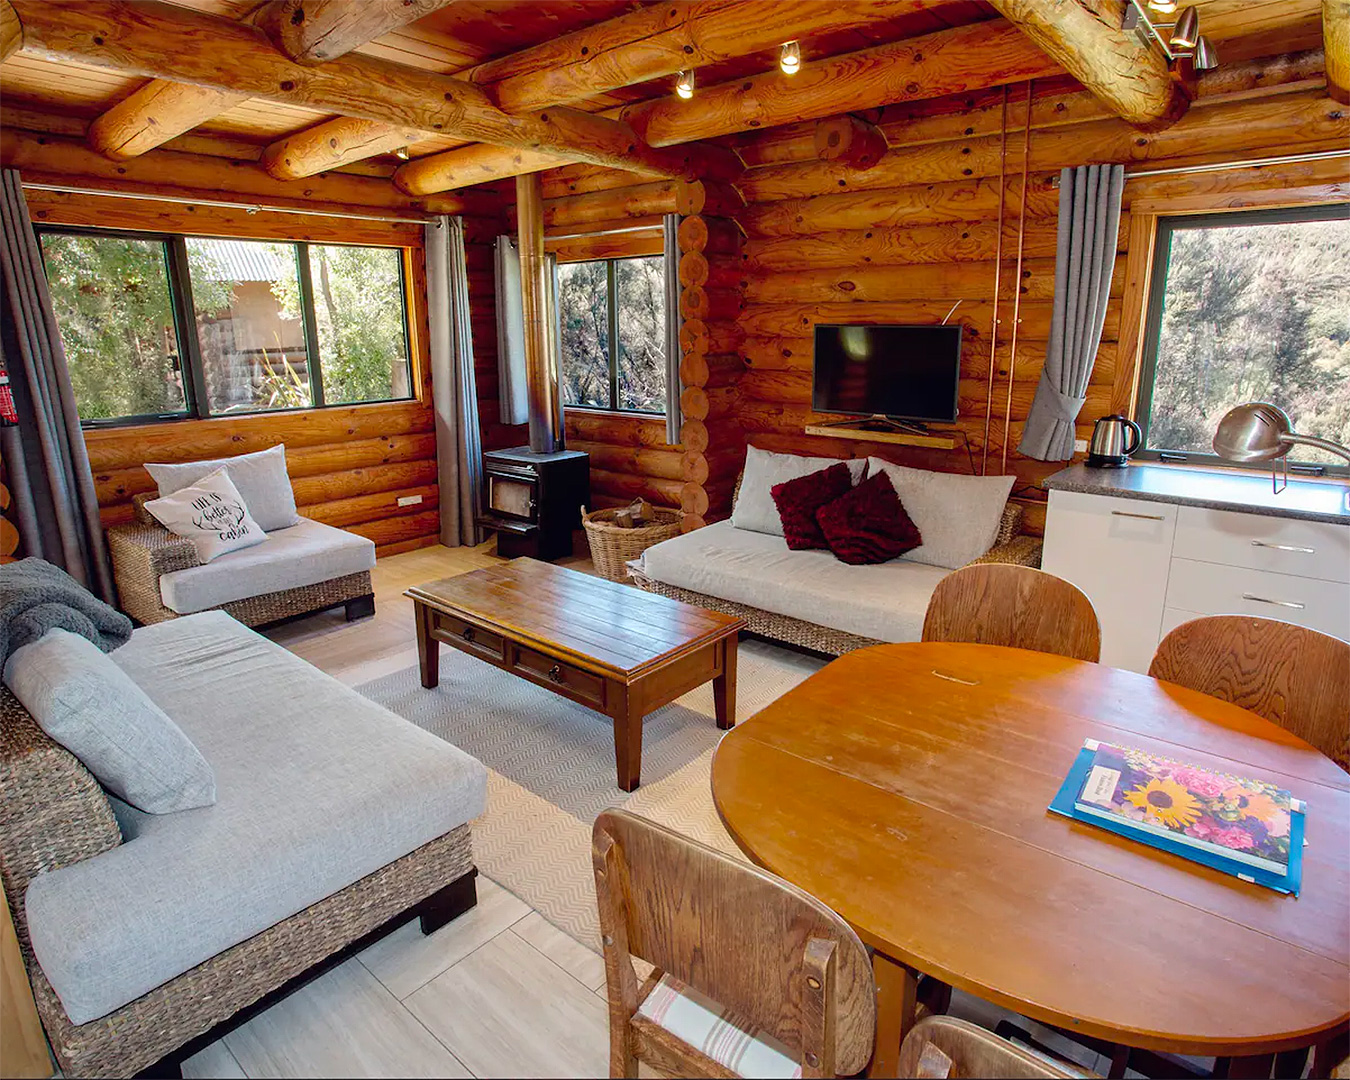 The wooden interior of the stunning cabbage tree cabin, one of the best places to stay near Hanmer Springs.